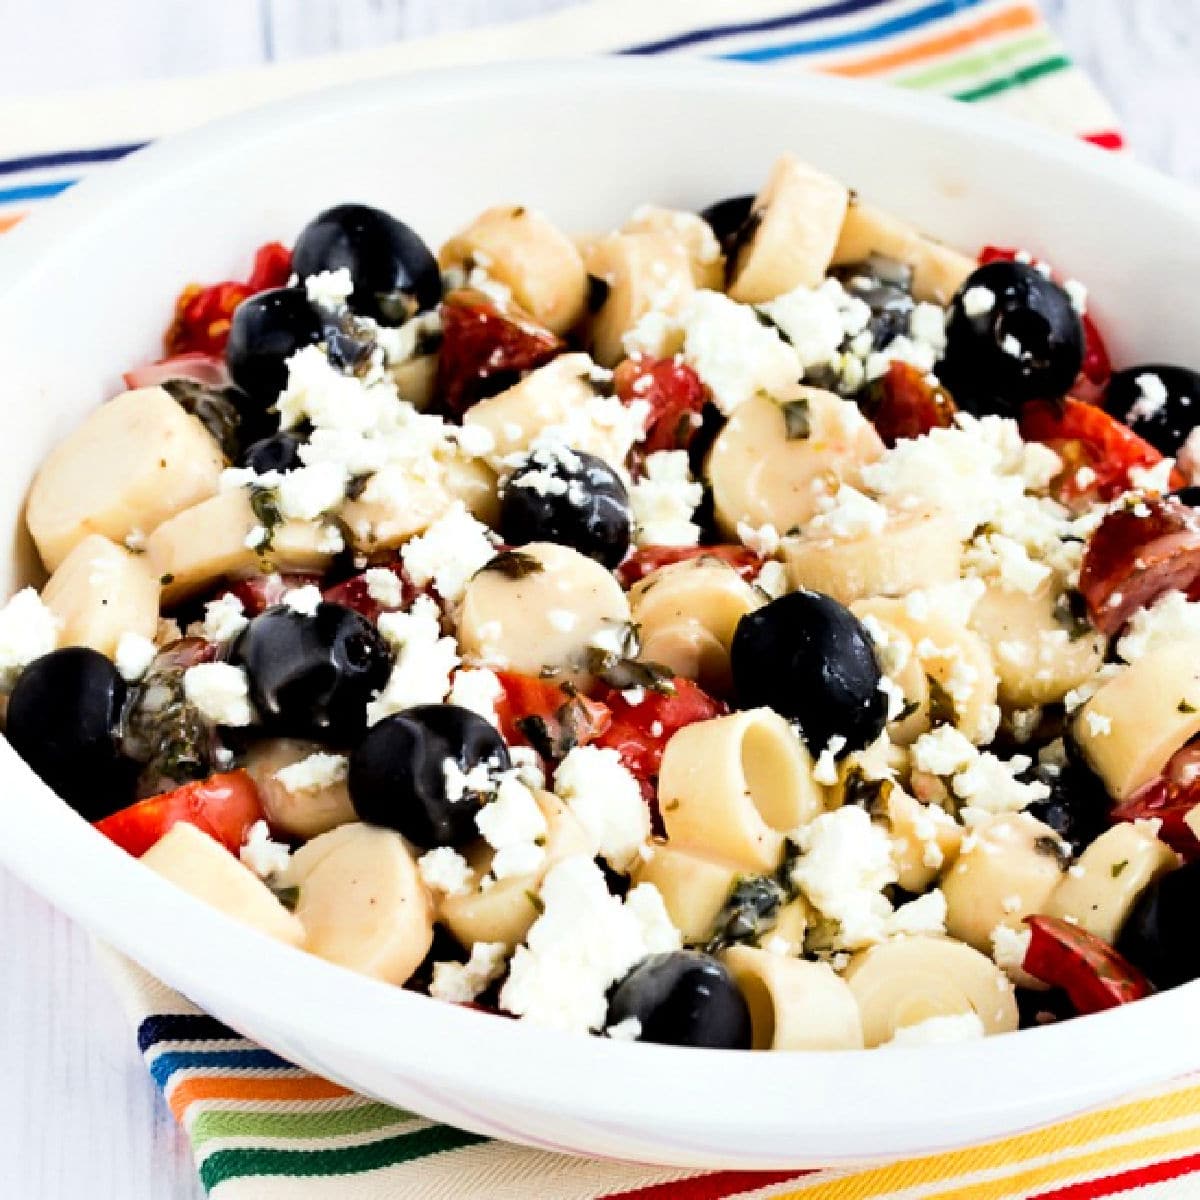 Square image for Tomato Salad with Hearts of Palm, Olives, and Feta shown in white serving bowl.